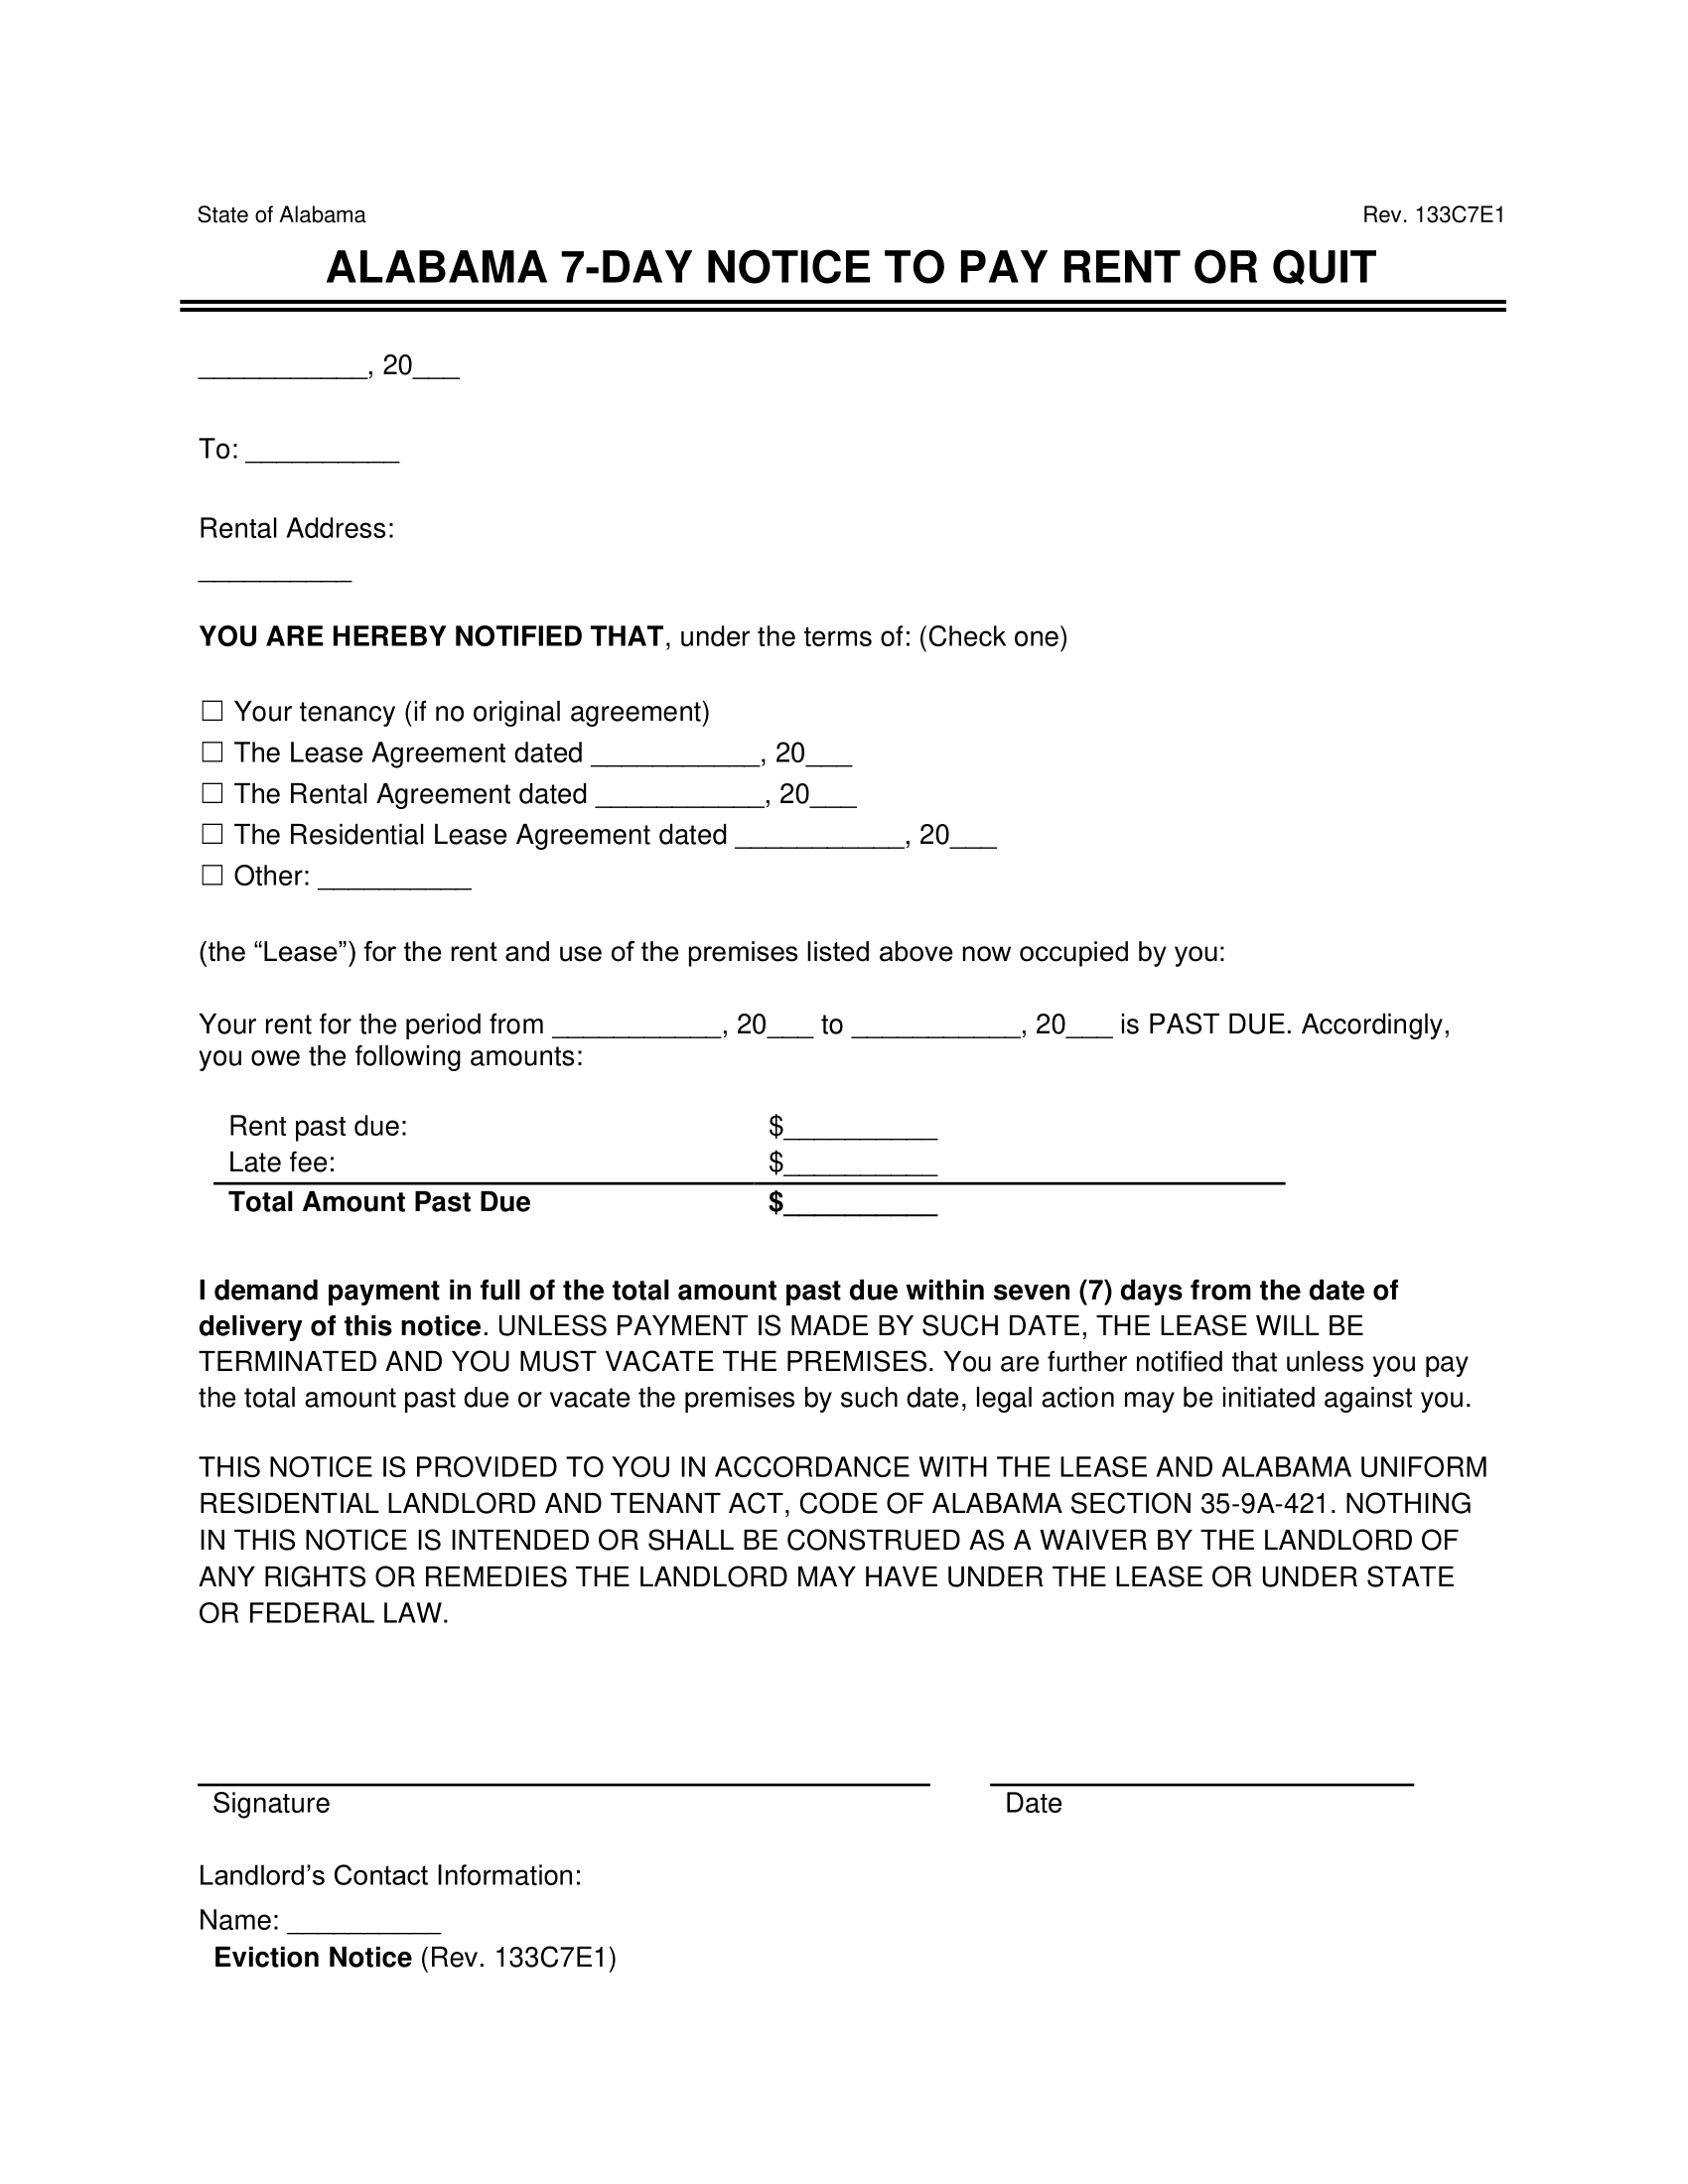 Alabama 7-Day Notice to Quit for Non-Payment of Rent